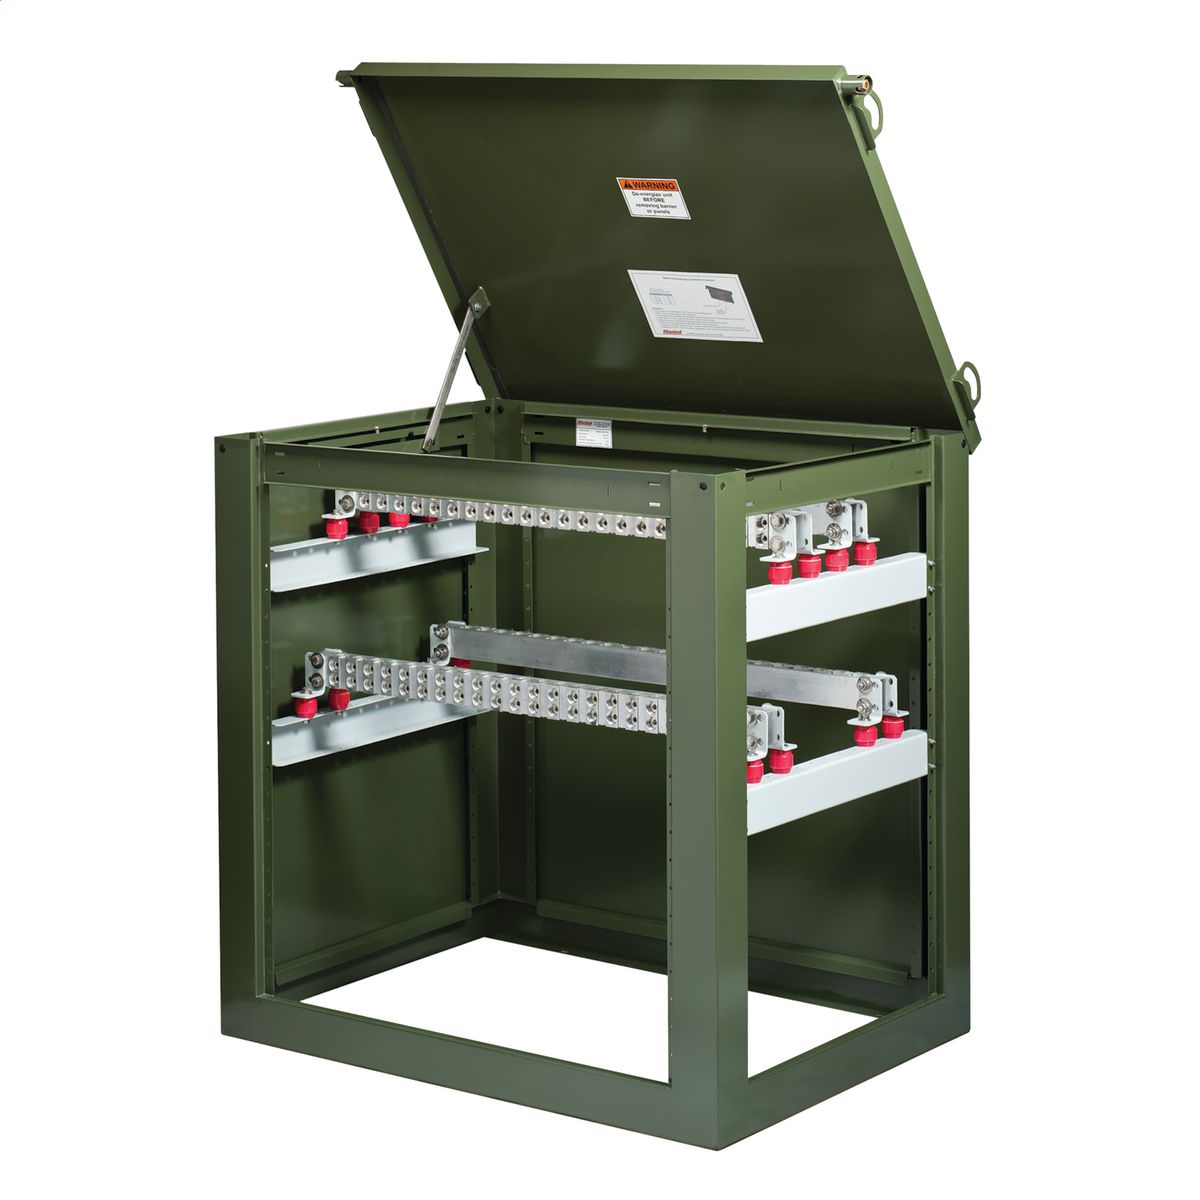 SNAP power system contained in two trays, each 160 × 100 × 30mm. Left